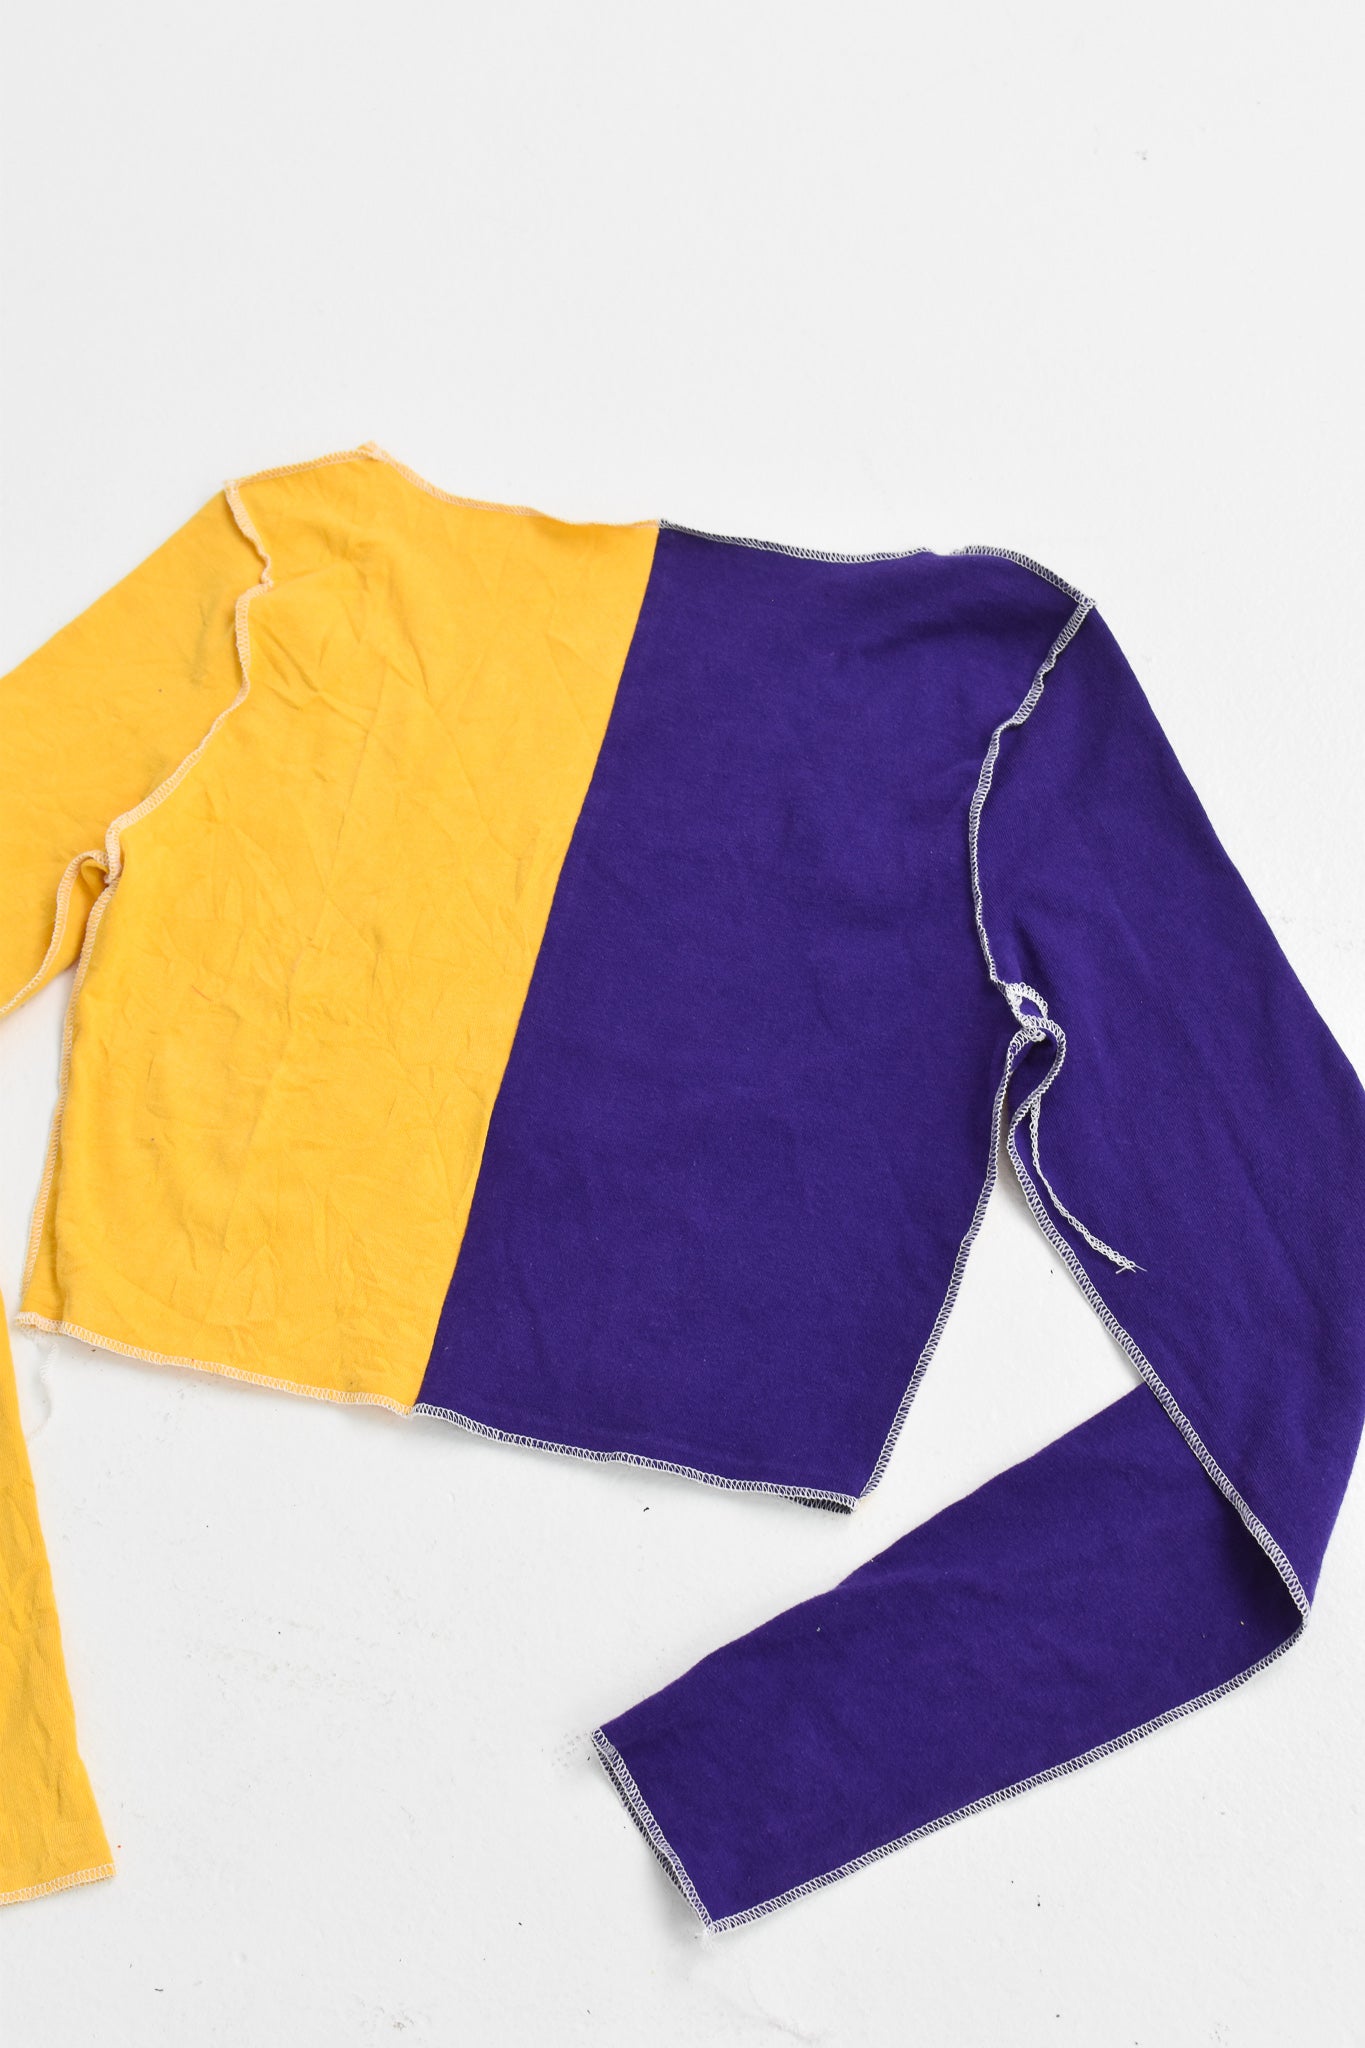 Upcycled LSU Spliced Scoopneck Top